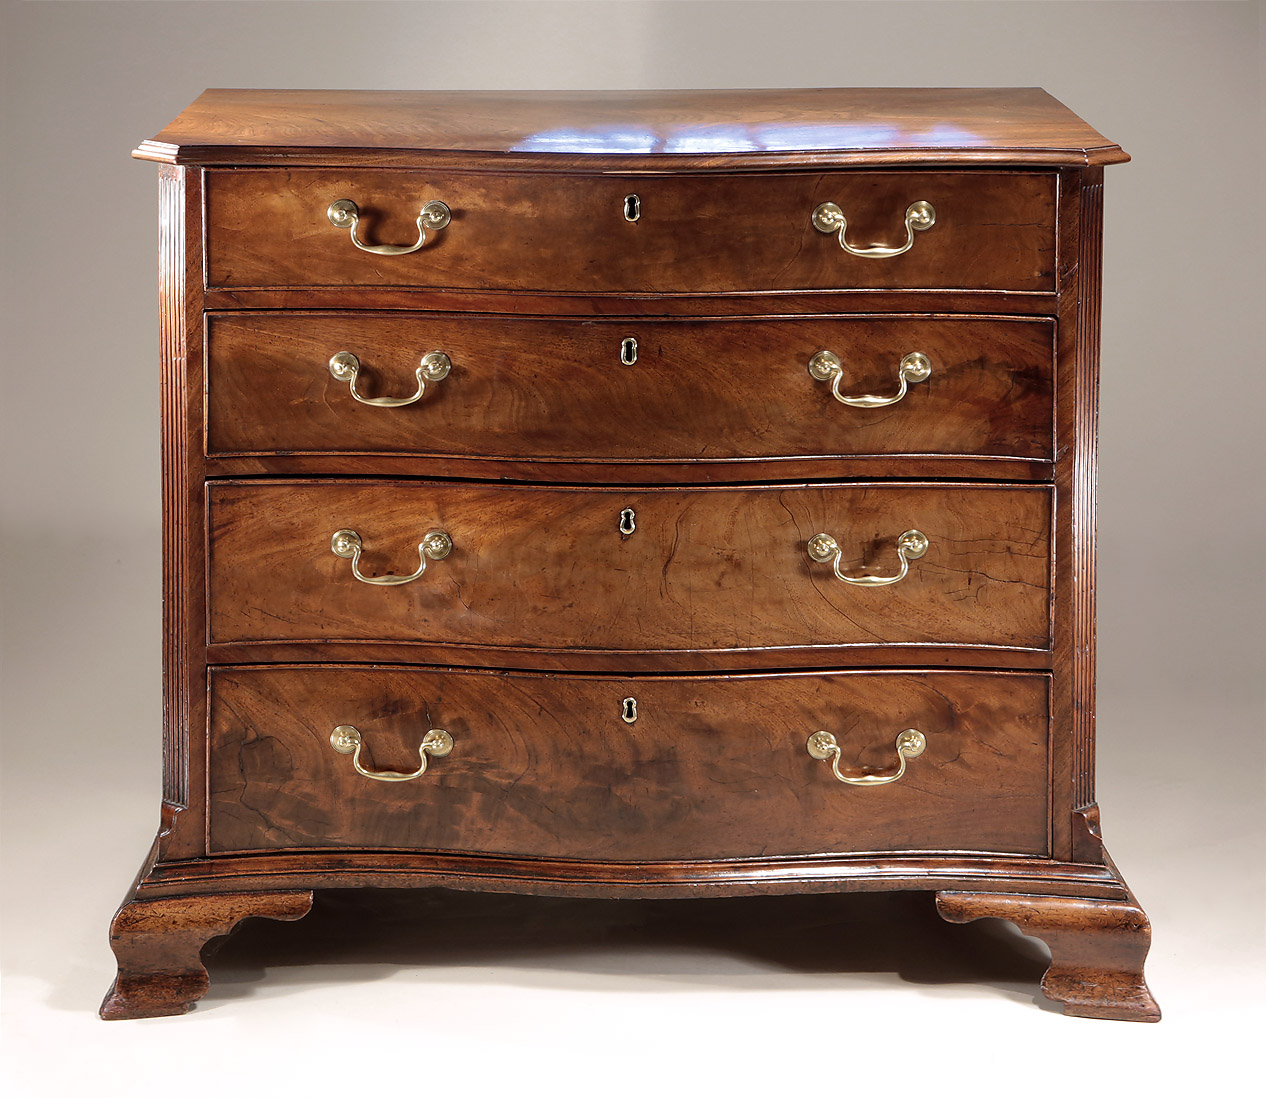 Fine_Early_George_III_Mahogany_Serpentine_Chest_c1760_frontal_view